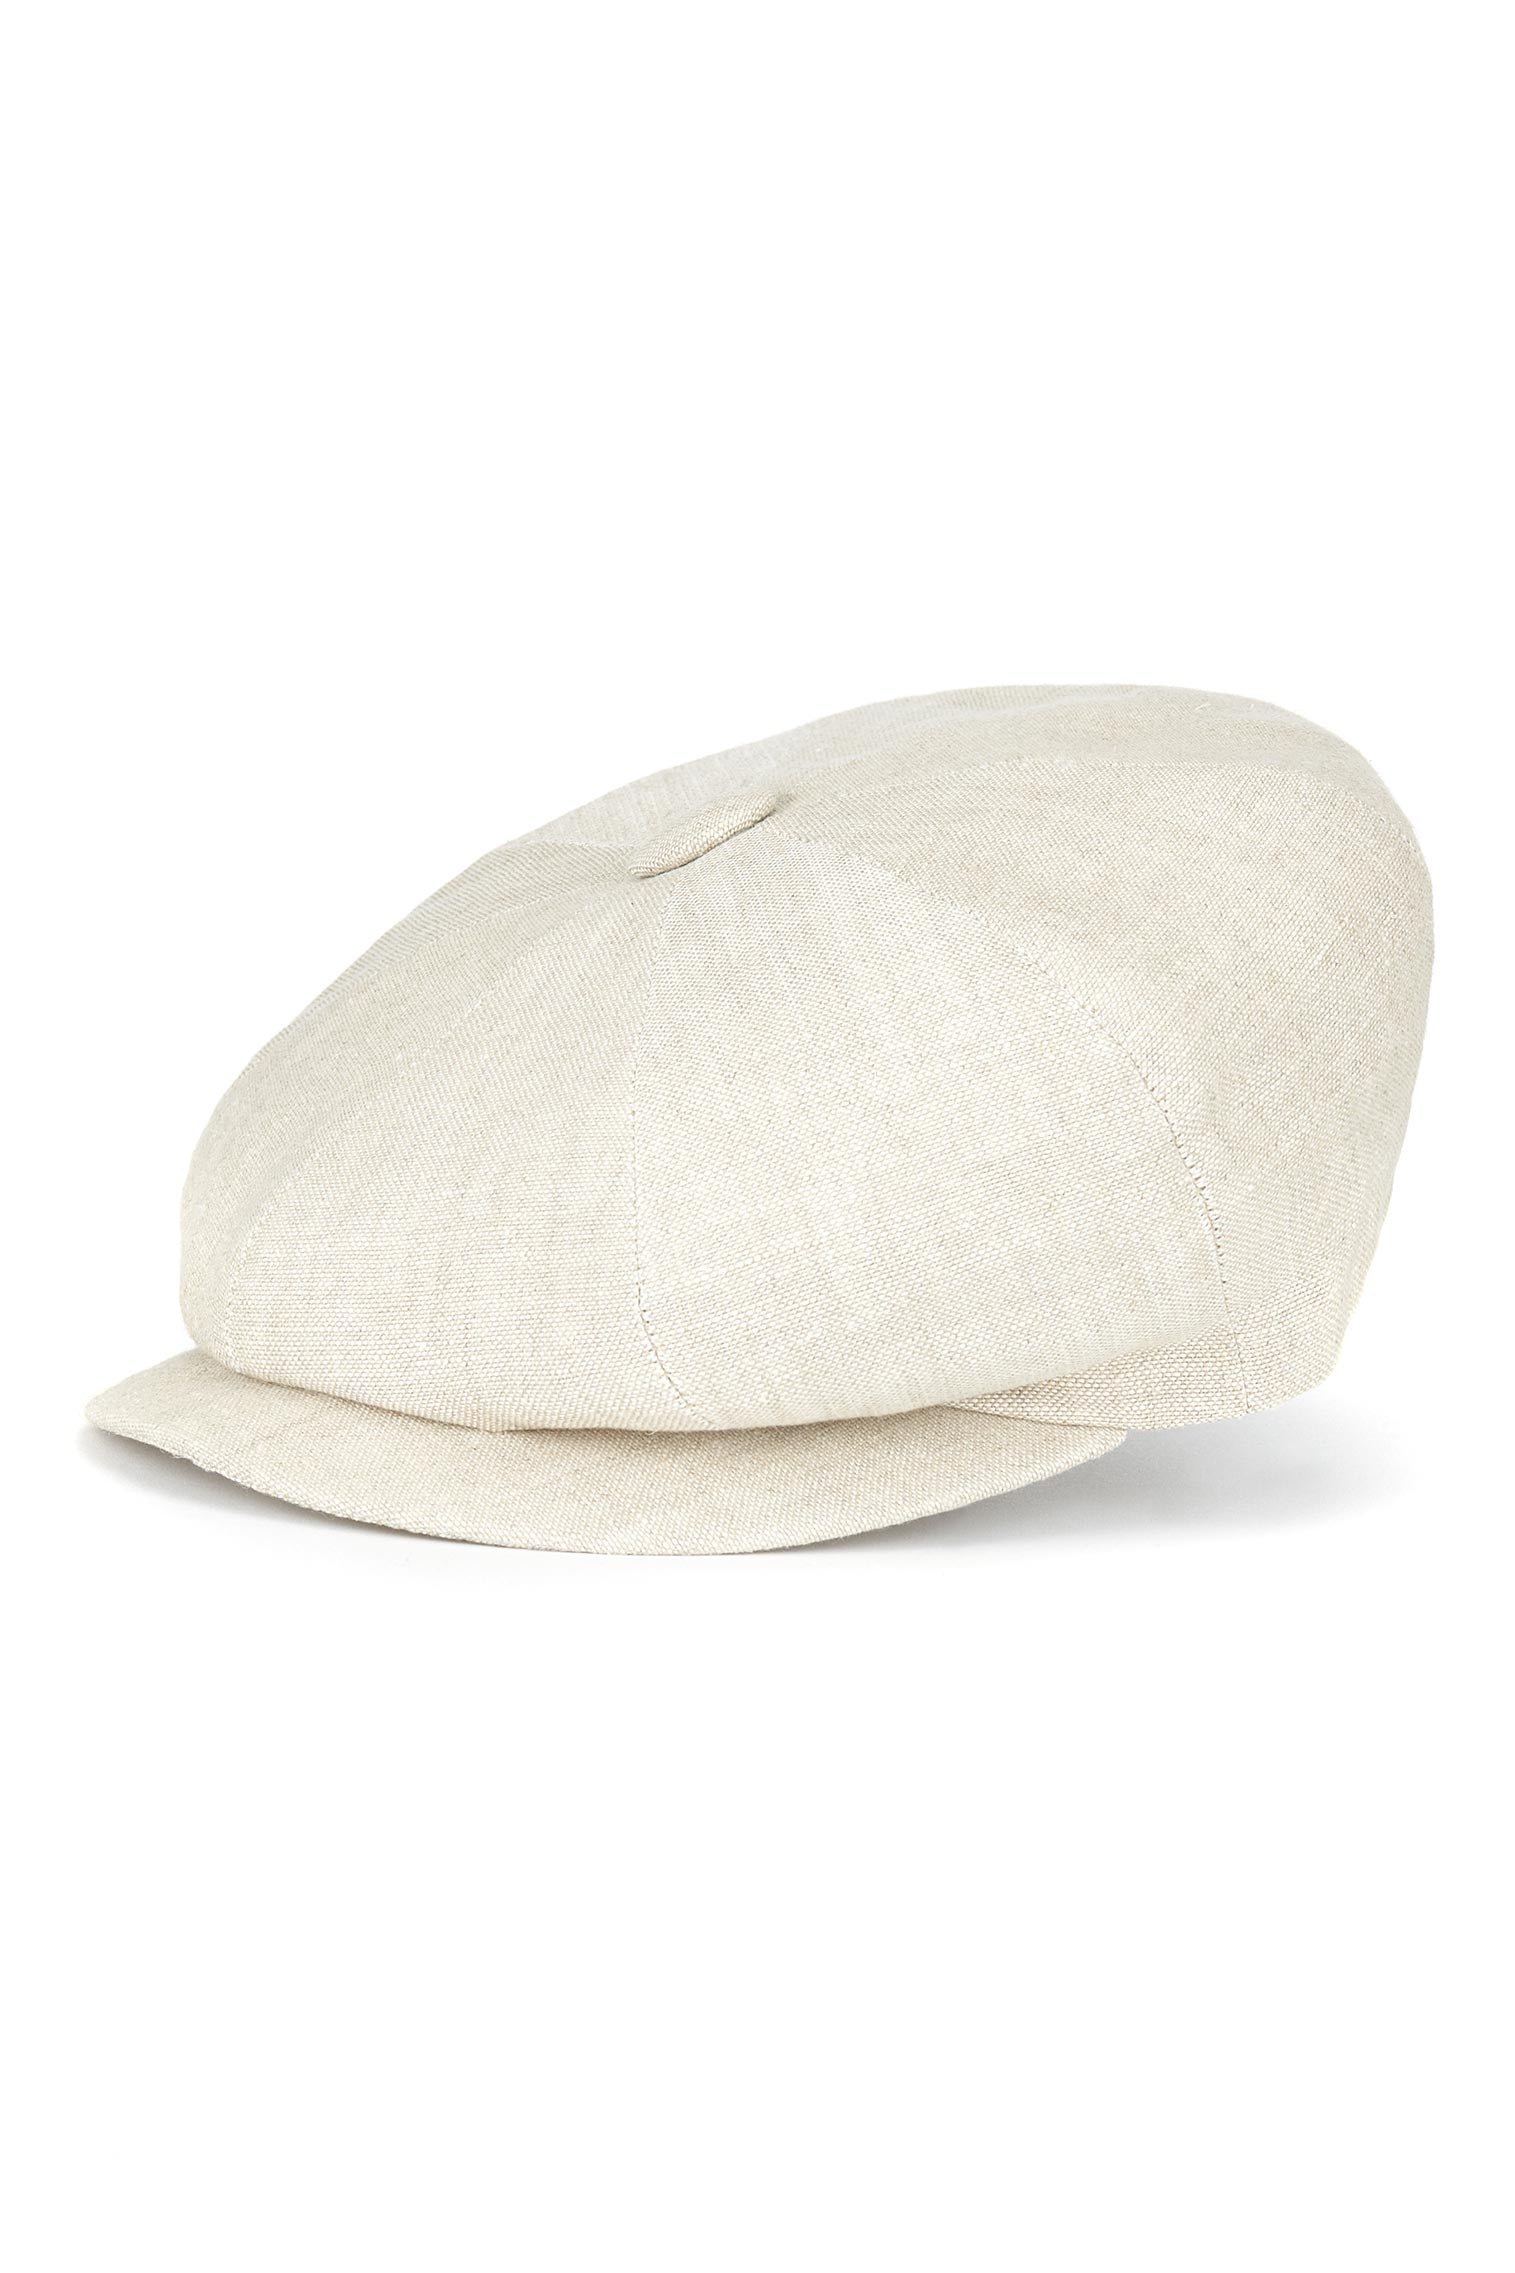 Linen Muirfield Bakerboy Cap - Hats for Square Face Shapes - Lock & Co. Hatters London UK